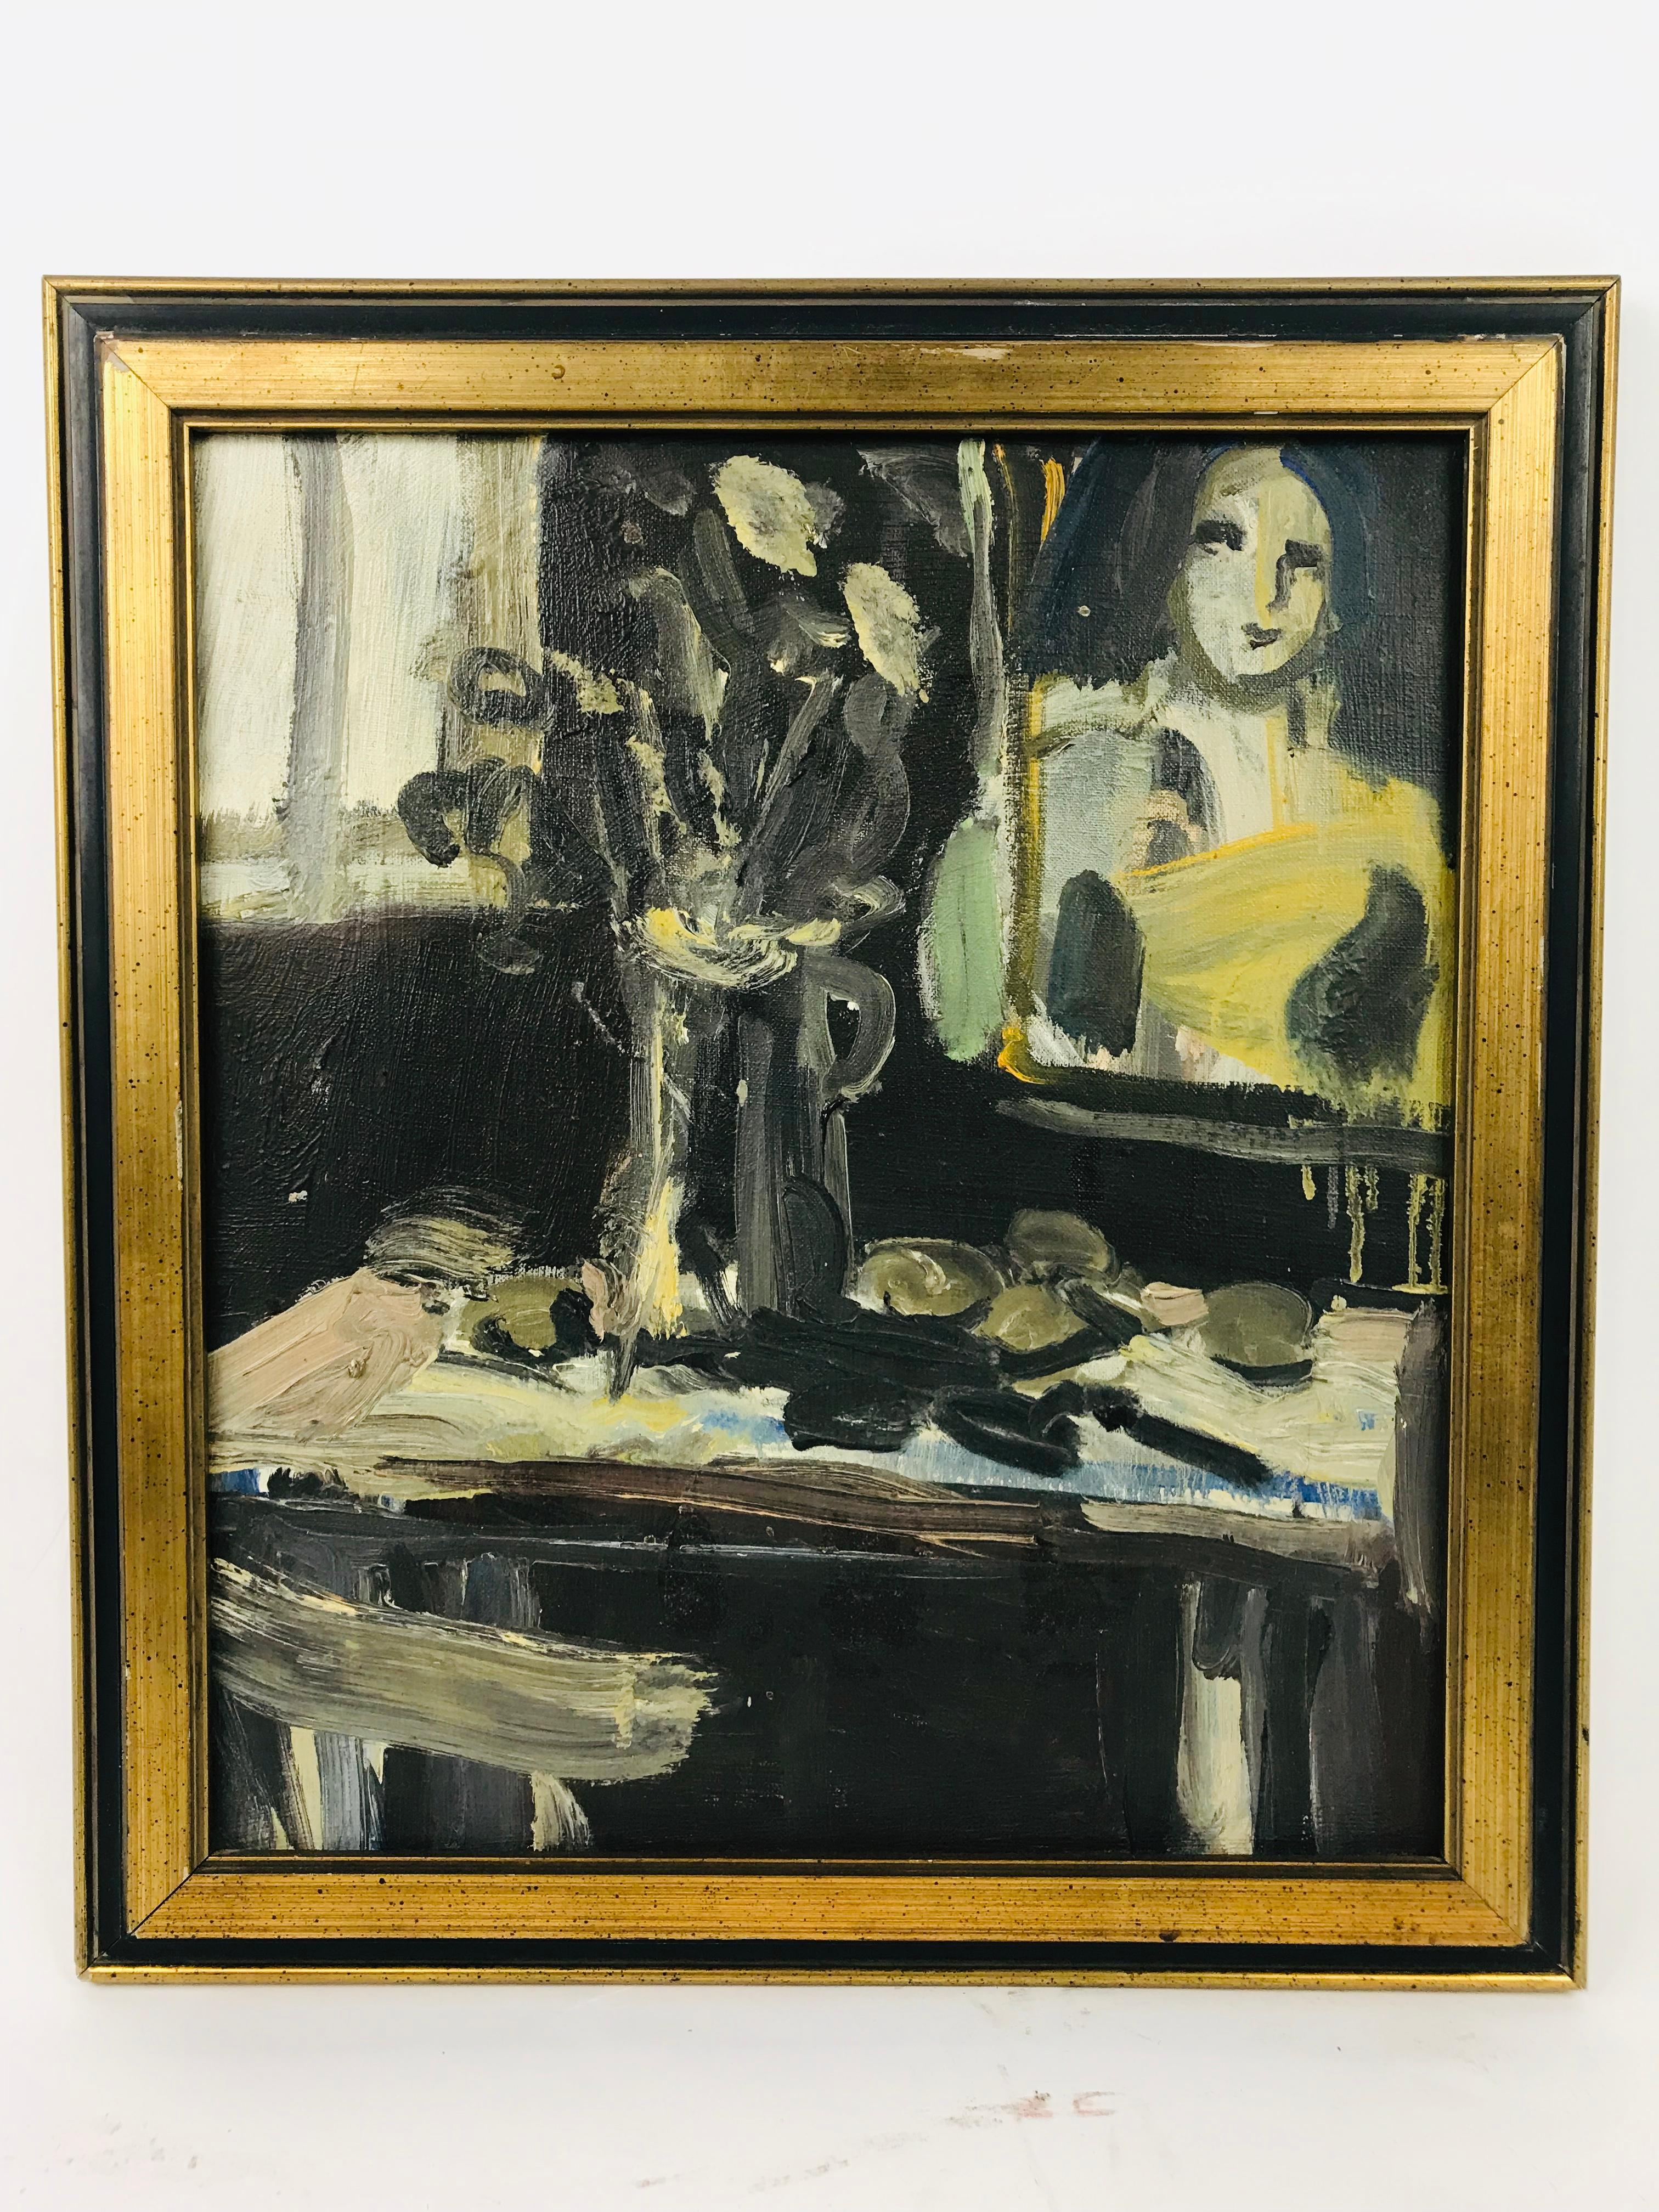 A twilight-eske 20th century oil on canvas by Am. Listed artist Vernon Lobb. A mysterious and somewhat dubious scene depicting a room in which a vase sits upon a desk with colorless flowers falling from a vase. A vacant look to the rooms